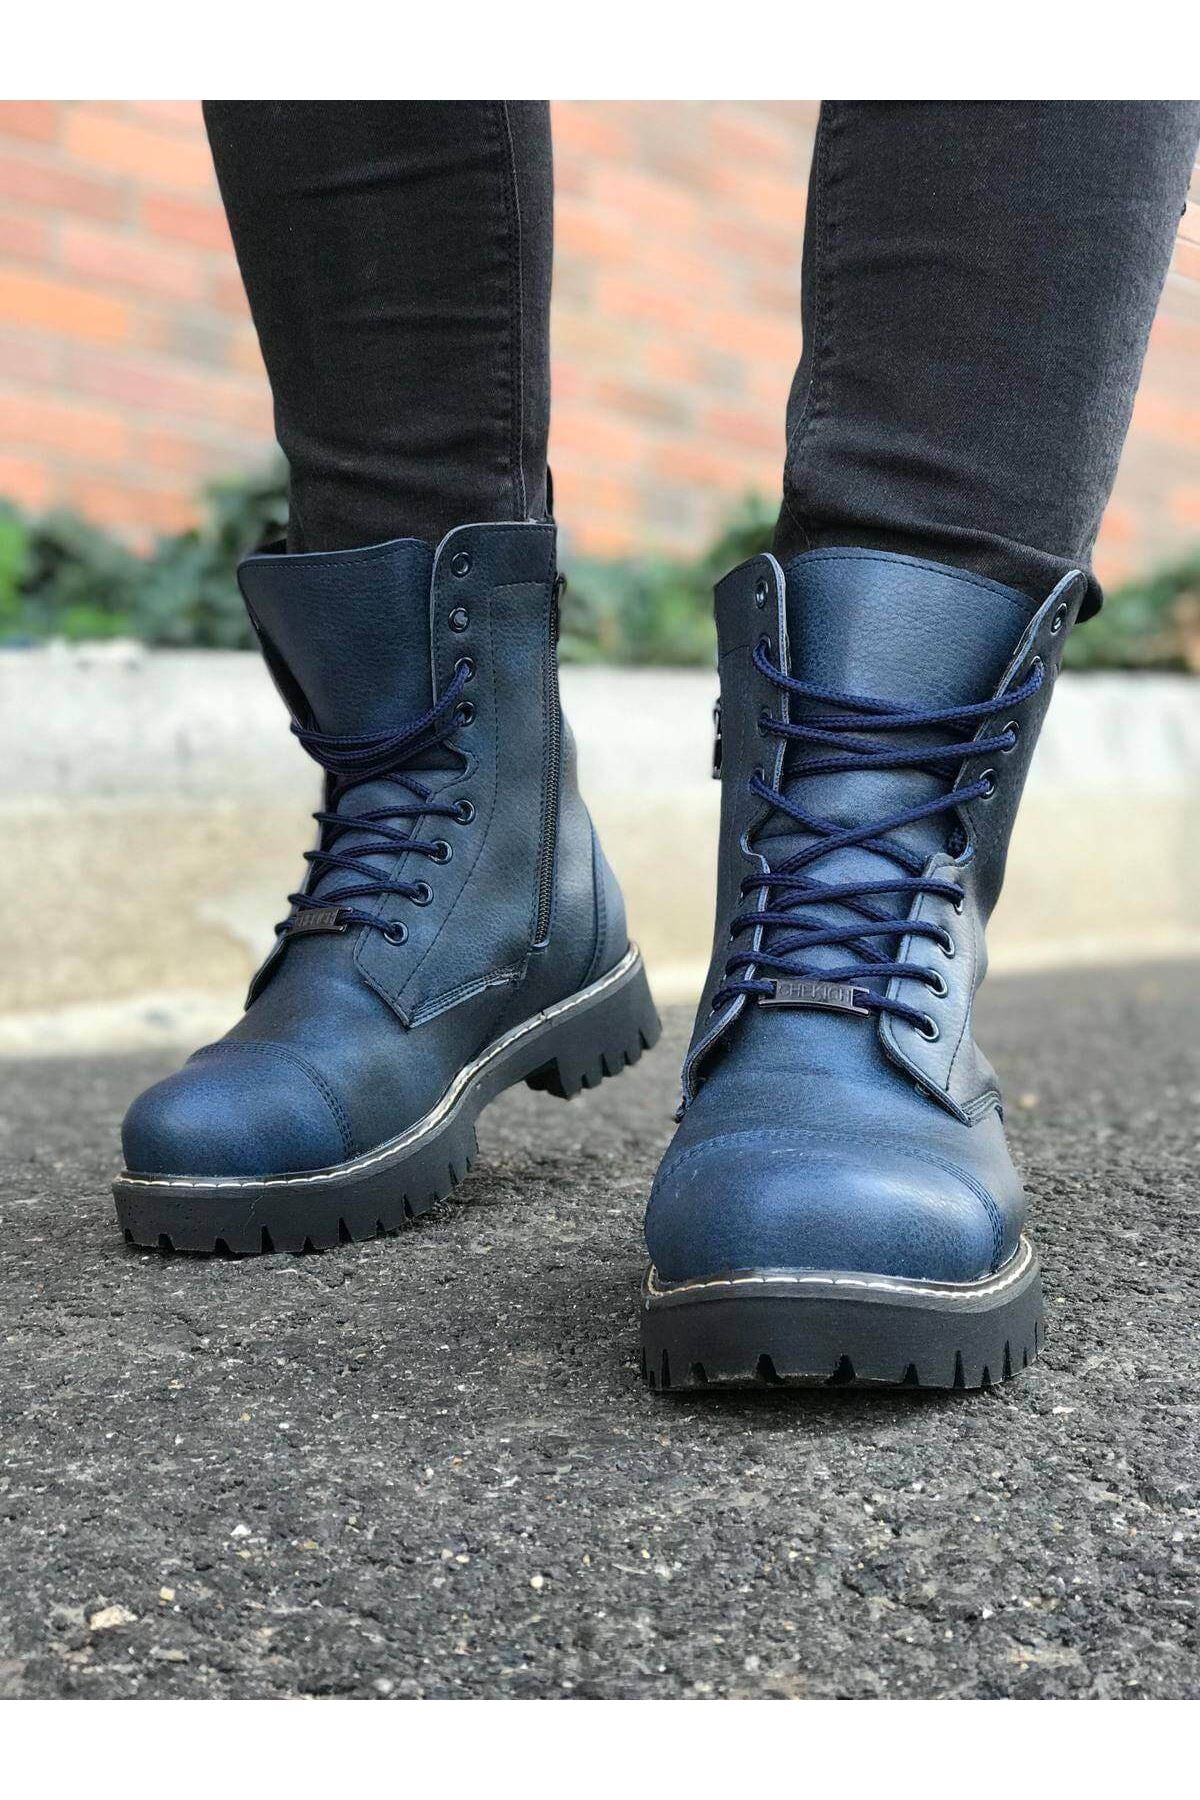 CH009 Men's Leather Navy Blue-Black Sole Casual Winter Boots - STREETMODE ™